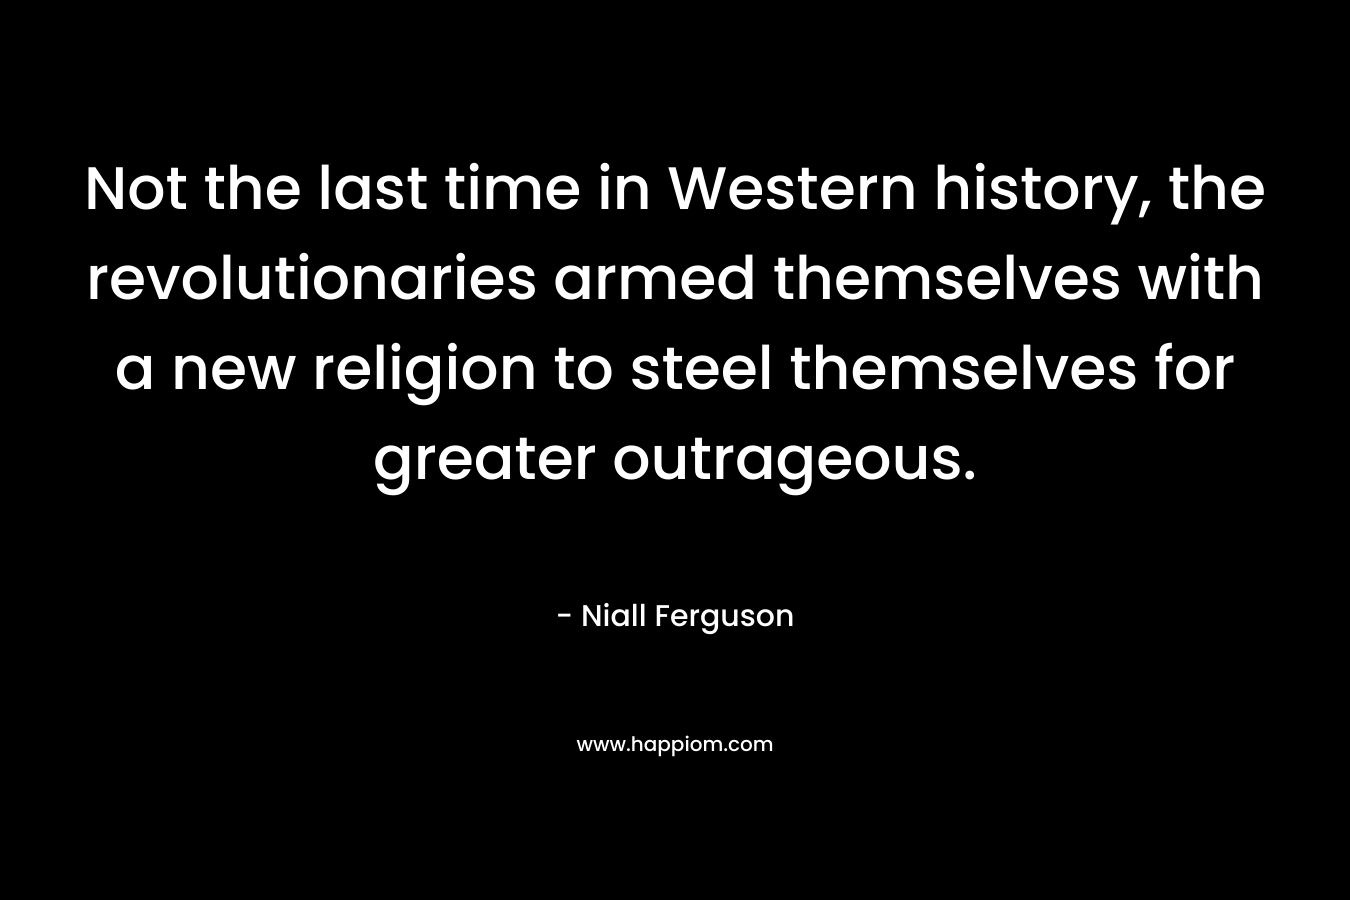 Not the last time in Western history, the revolutionaries armed themselves with a new religion to steel themselves for greater outrageous.